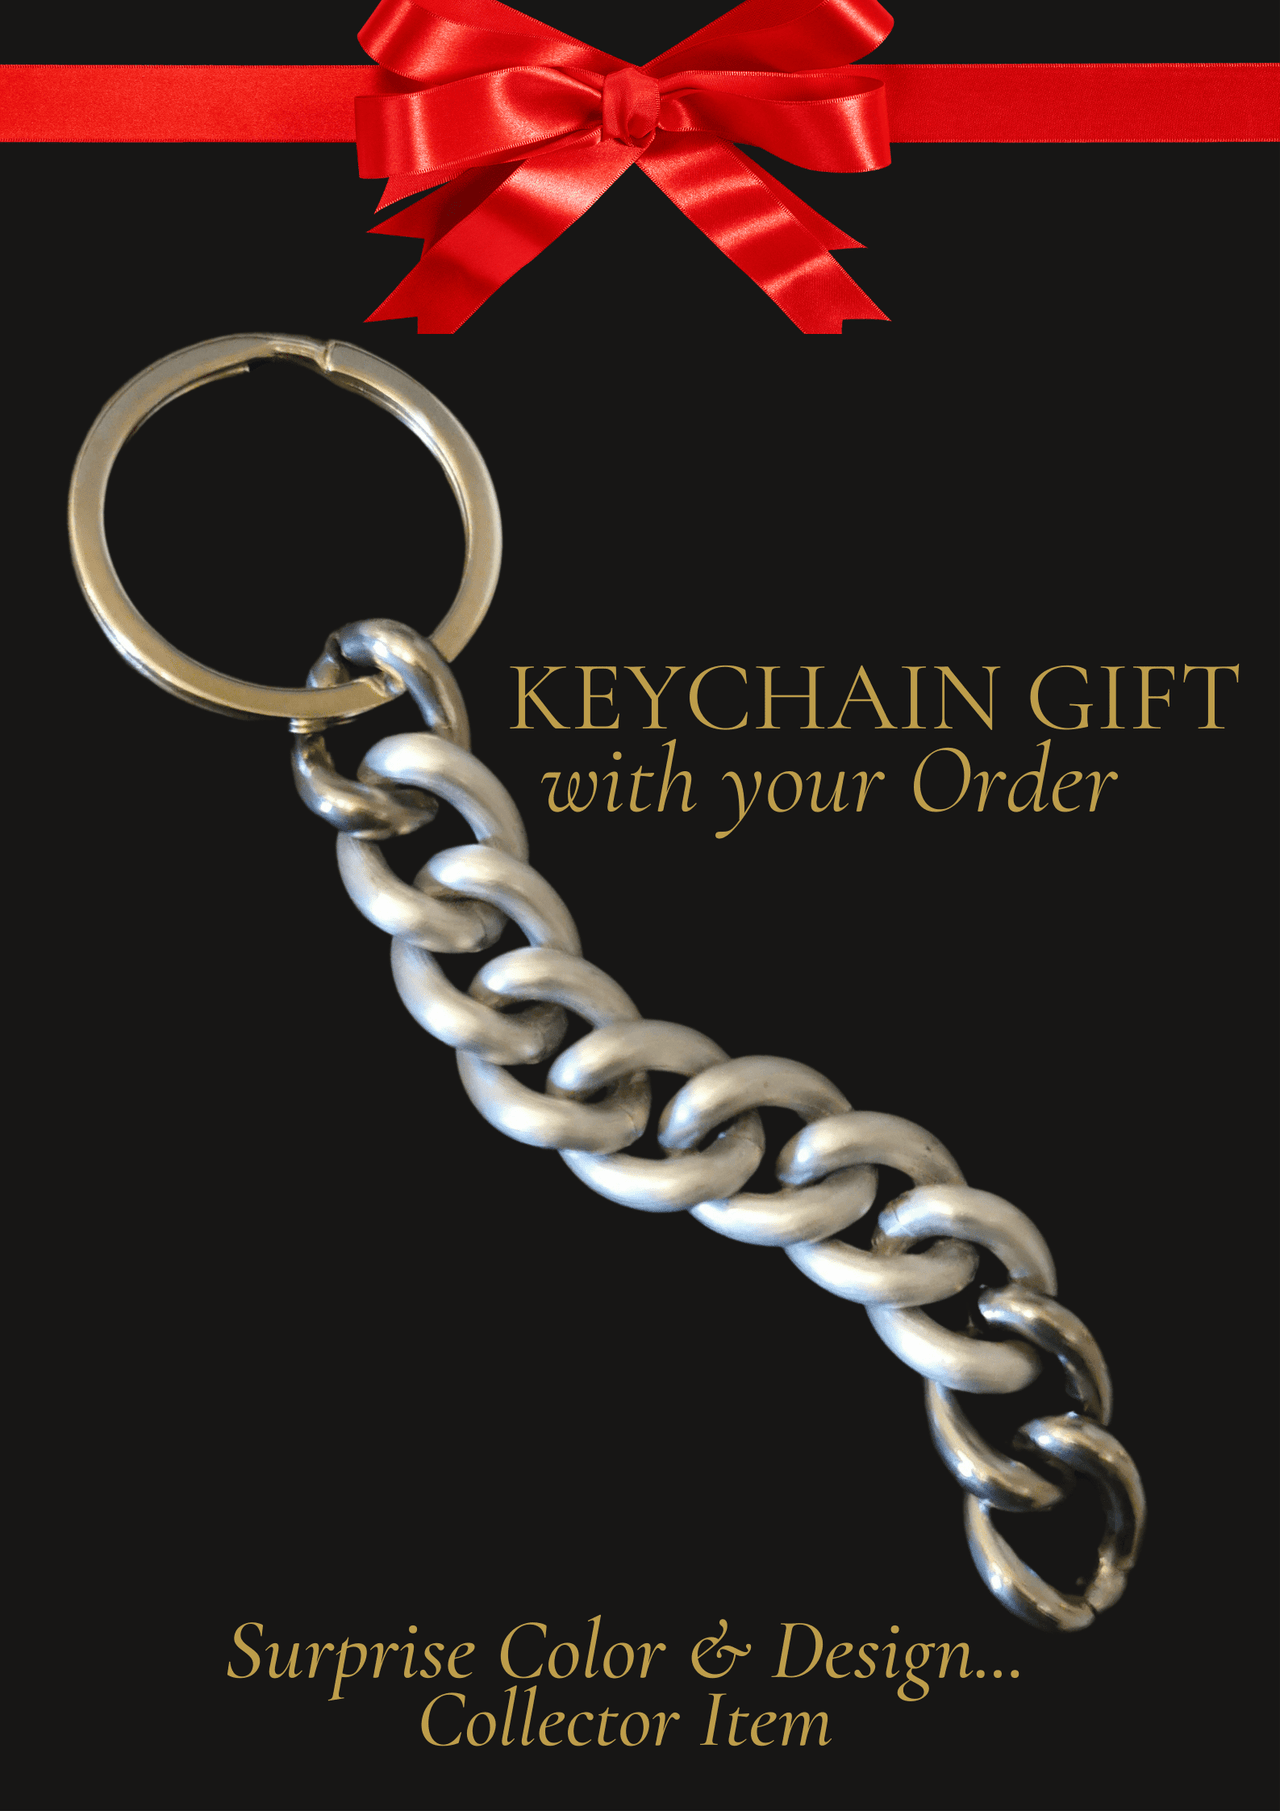 KEYCHAIN / ADD ON GIFT - Surprise Color & Design